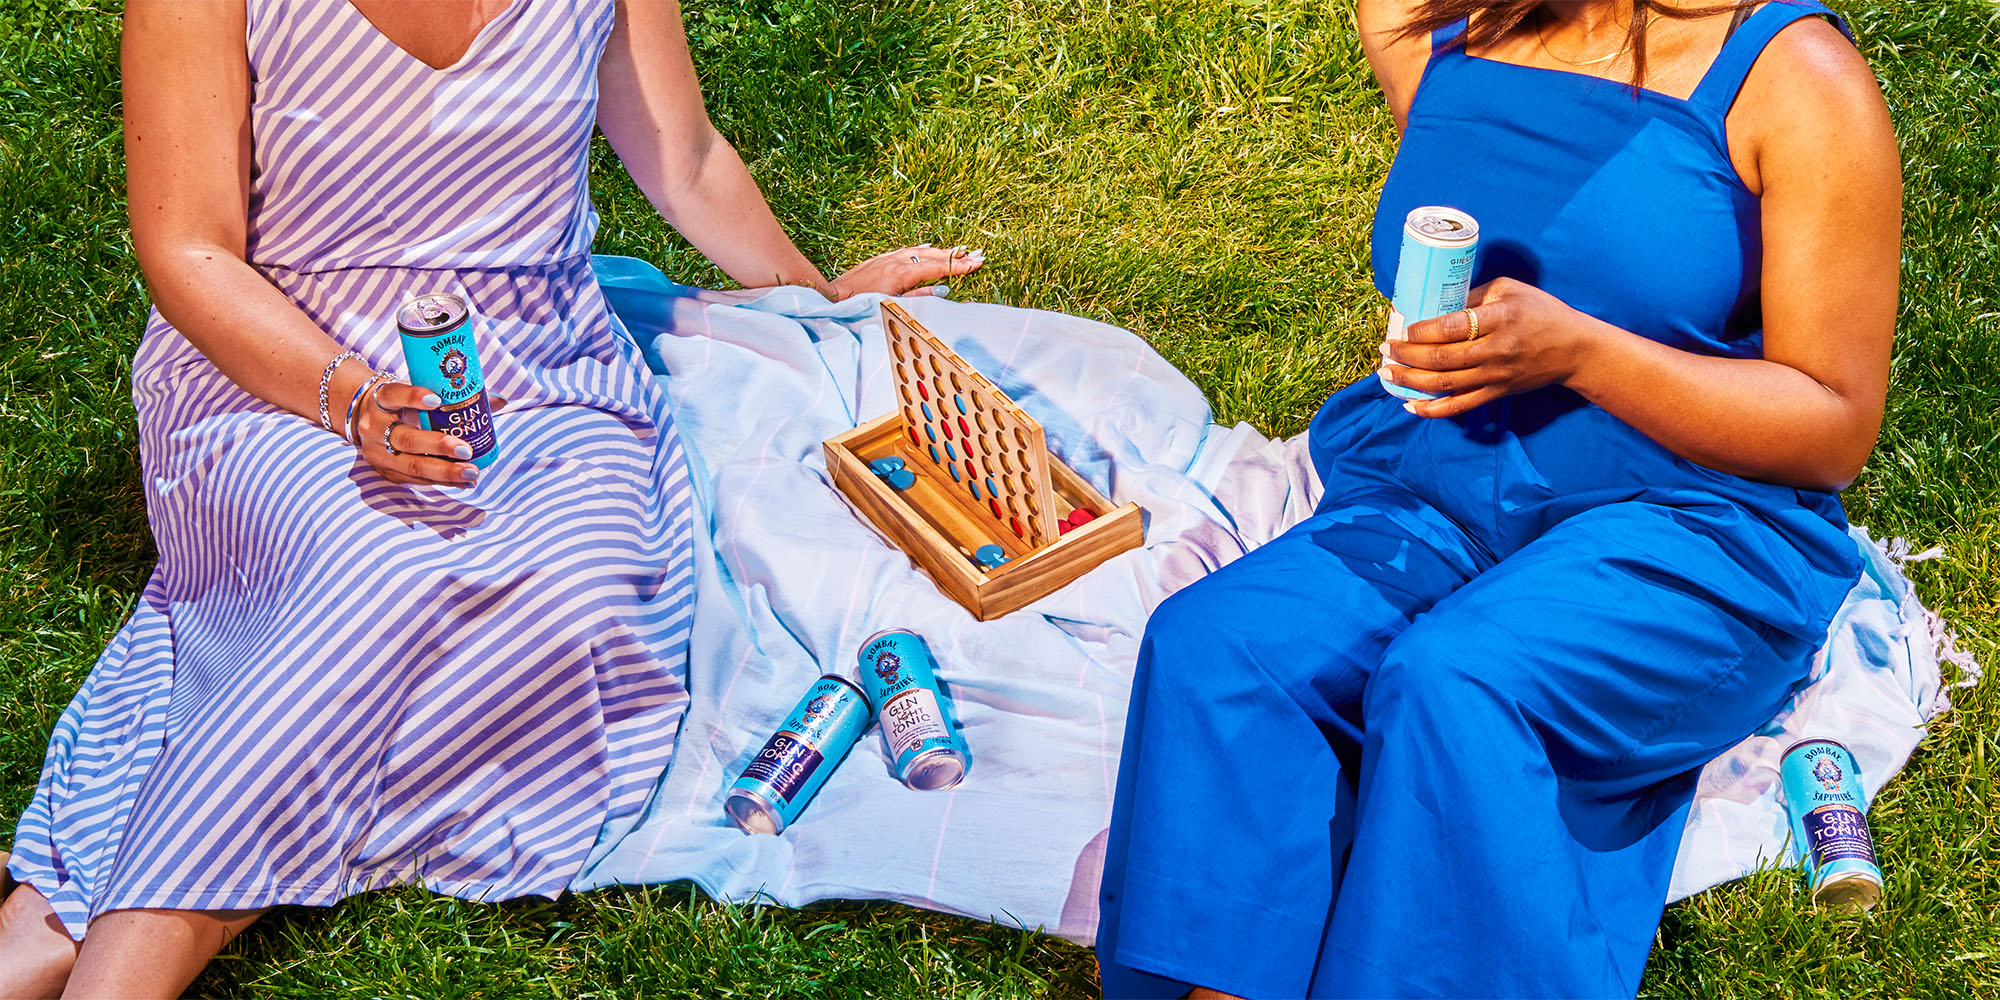 Sips of Summer: At the Park with Bombay Sapphire Gin & Tonic Canned Cocktails